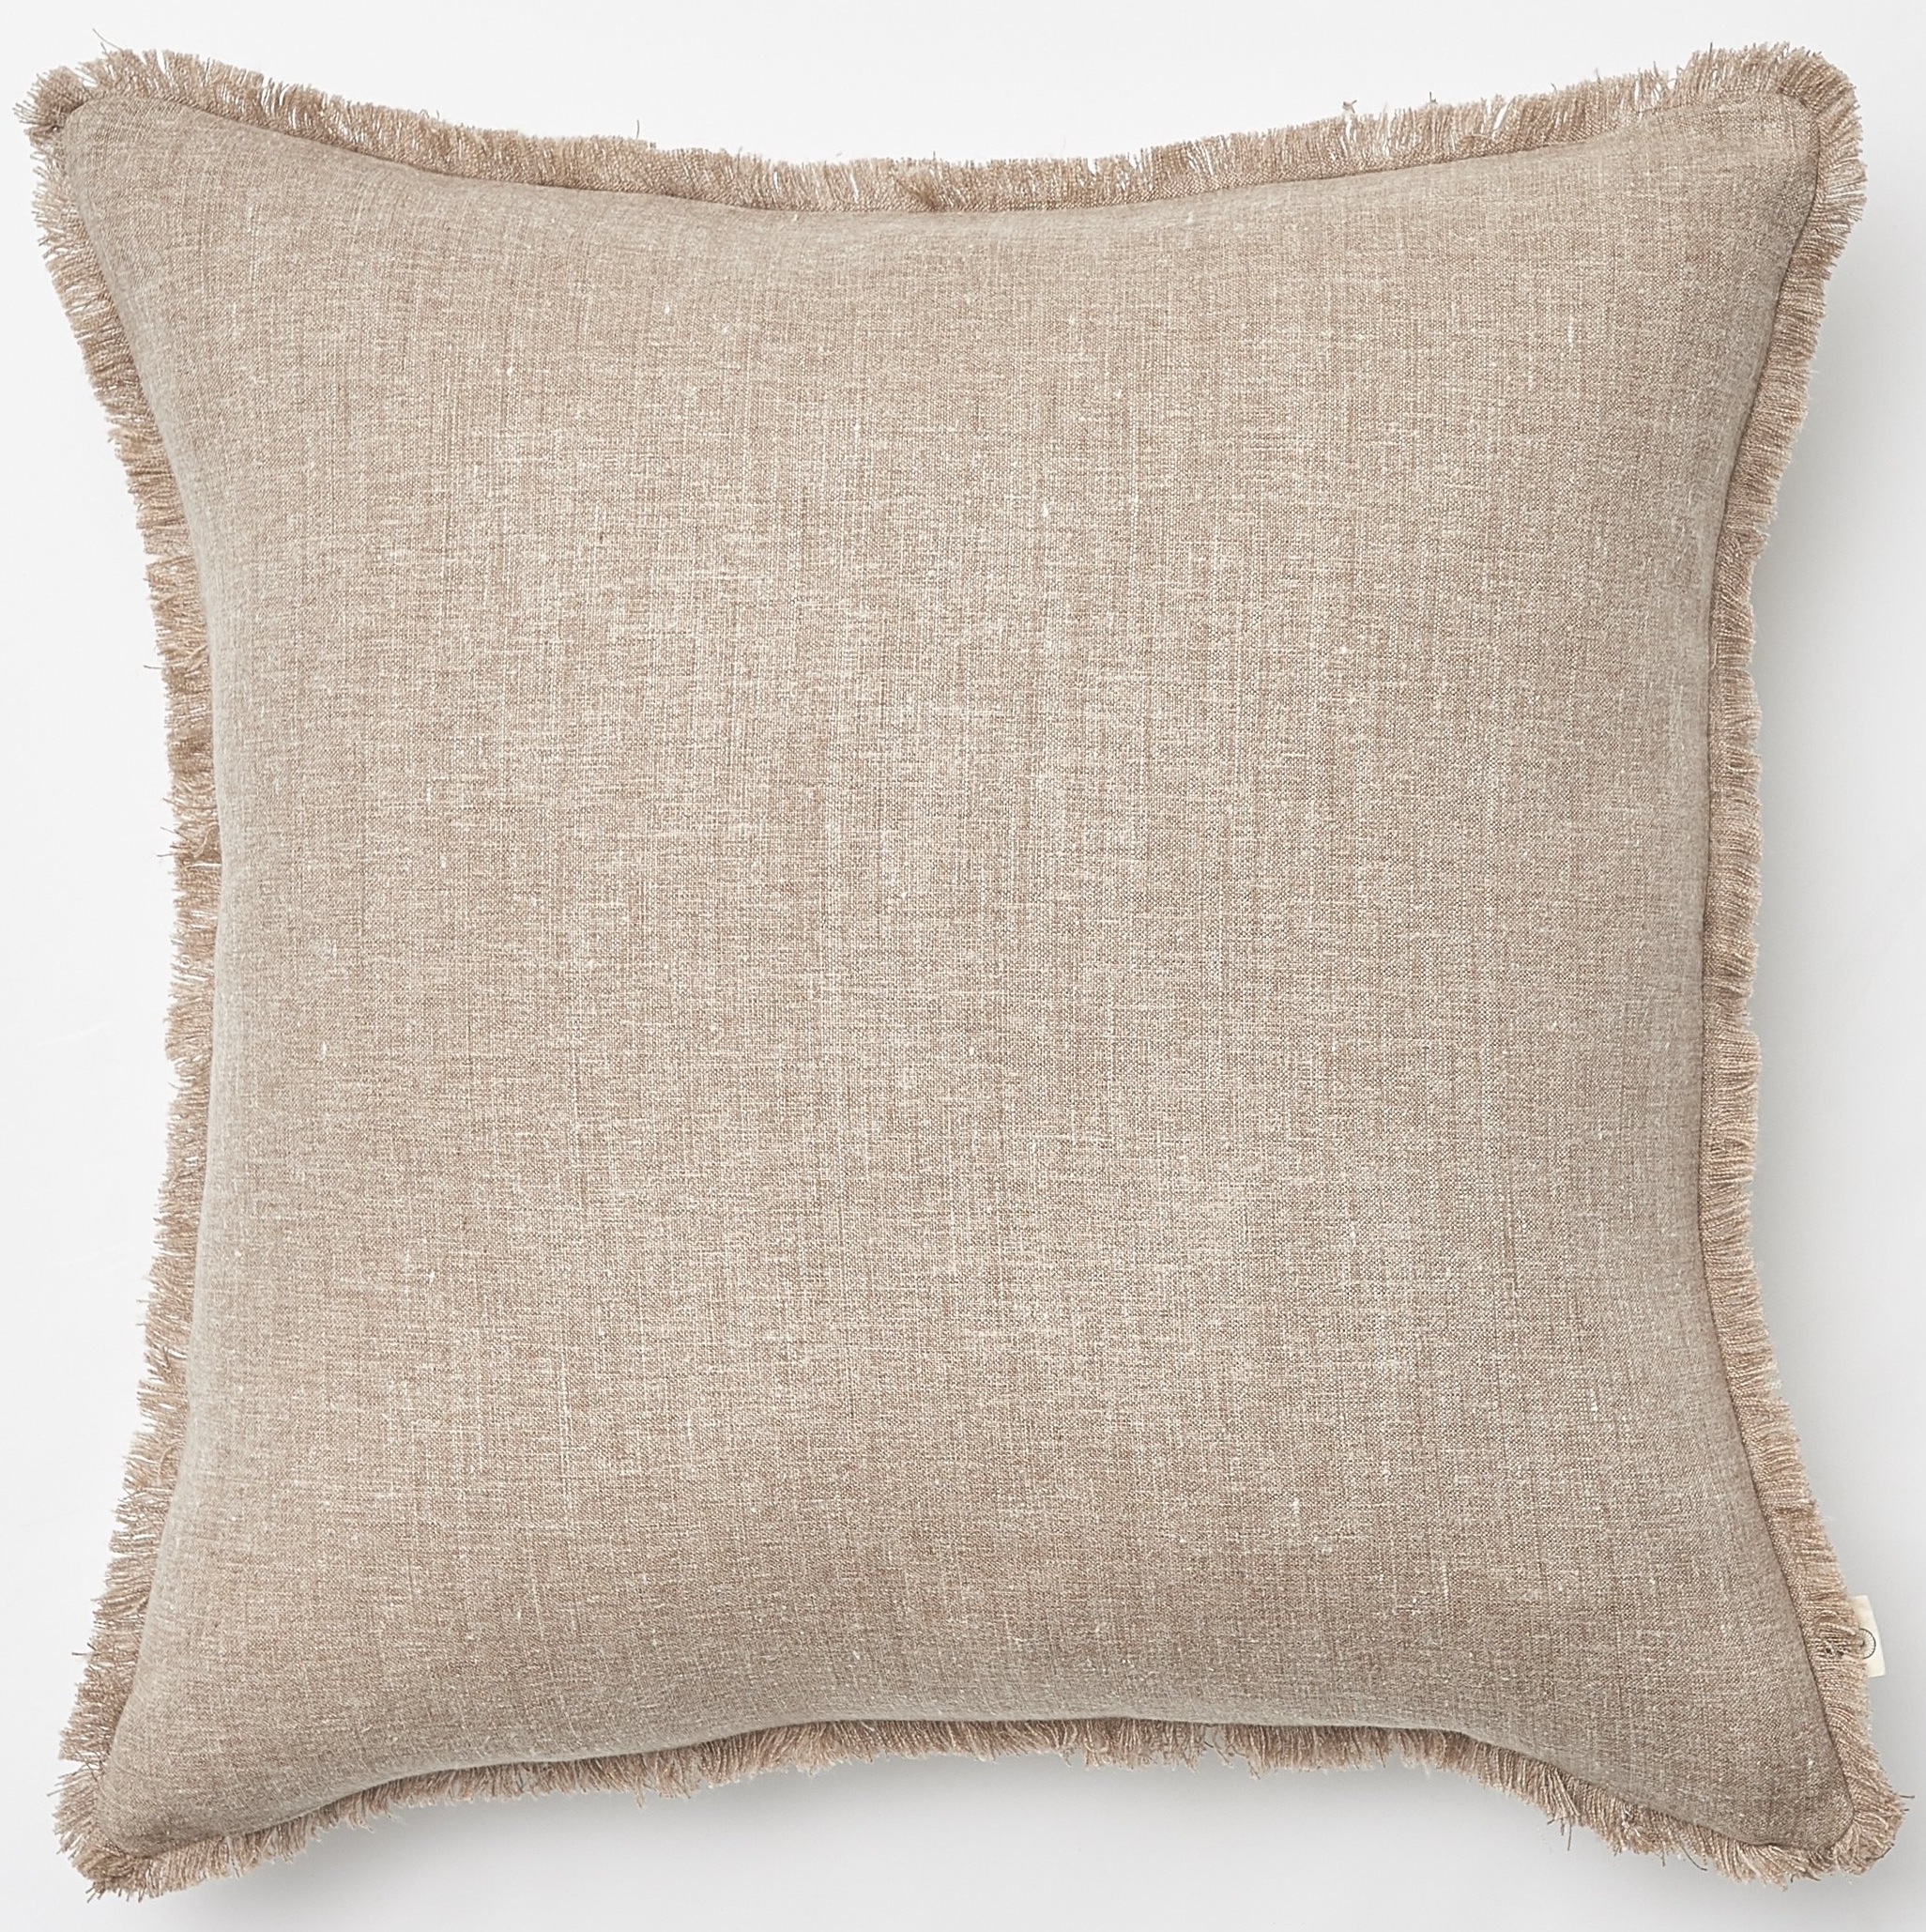 Frayed Edge Heathered Natural Belgium Linen Pillow — COUNTY ROAD